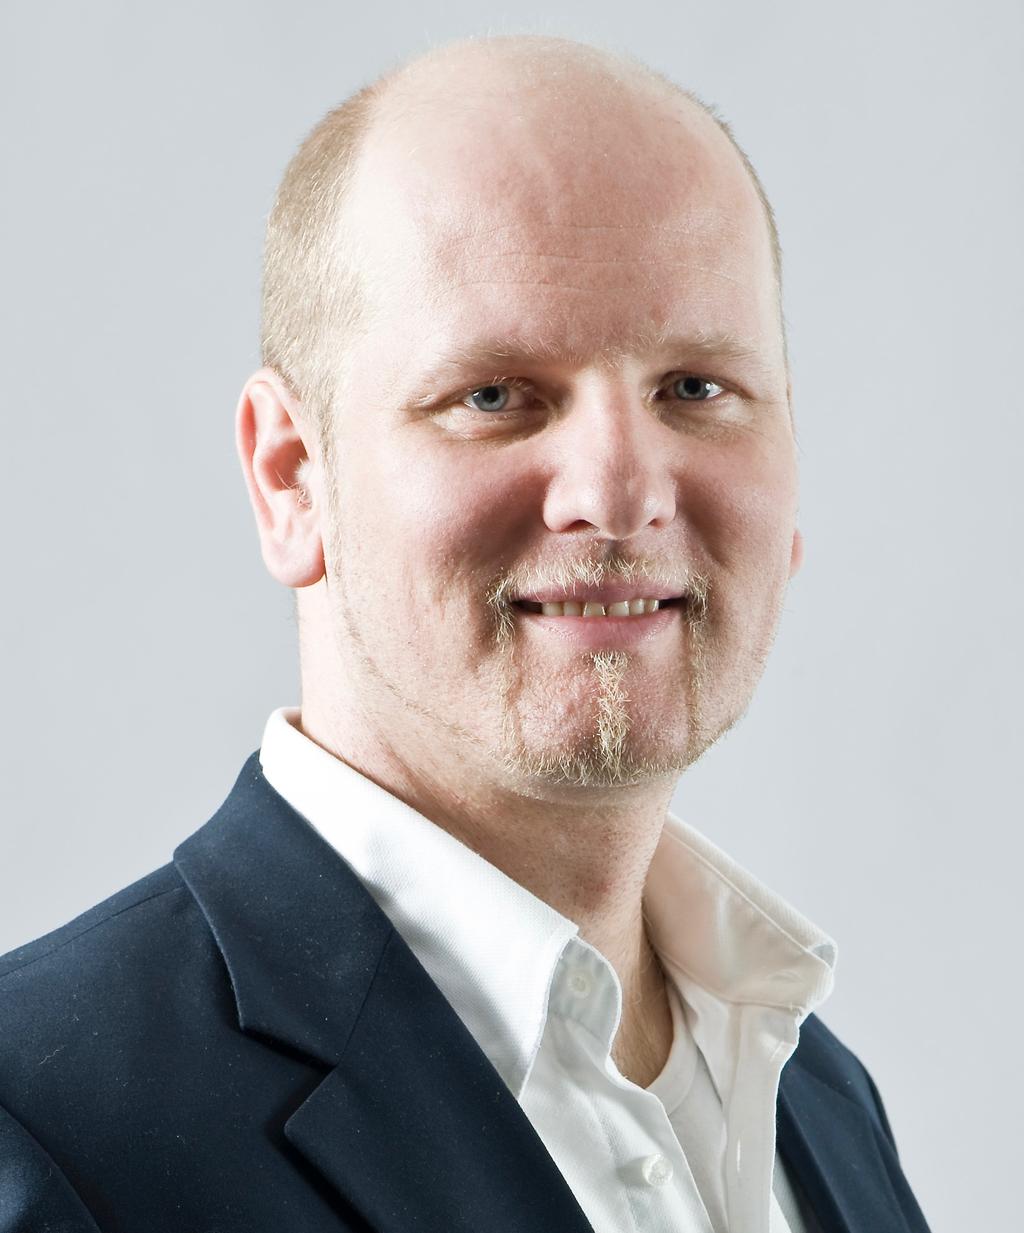 Jan Ott Working at Trivadis 20 years Principal Consultant BI Speaker at Conferences Consultant, Trainer, Software